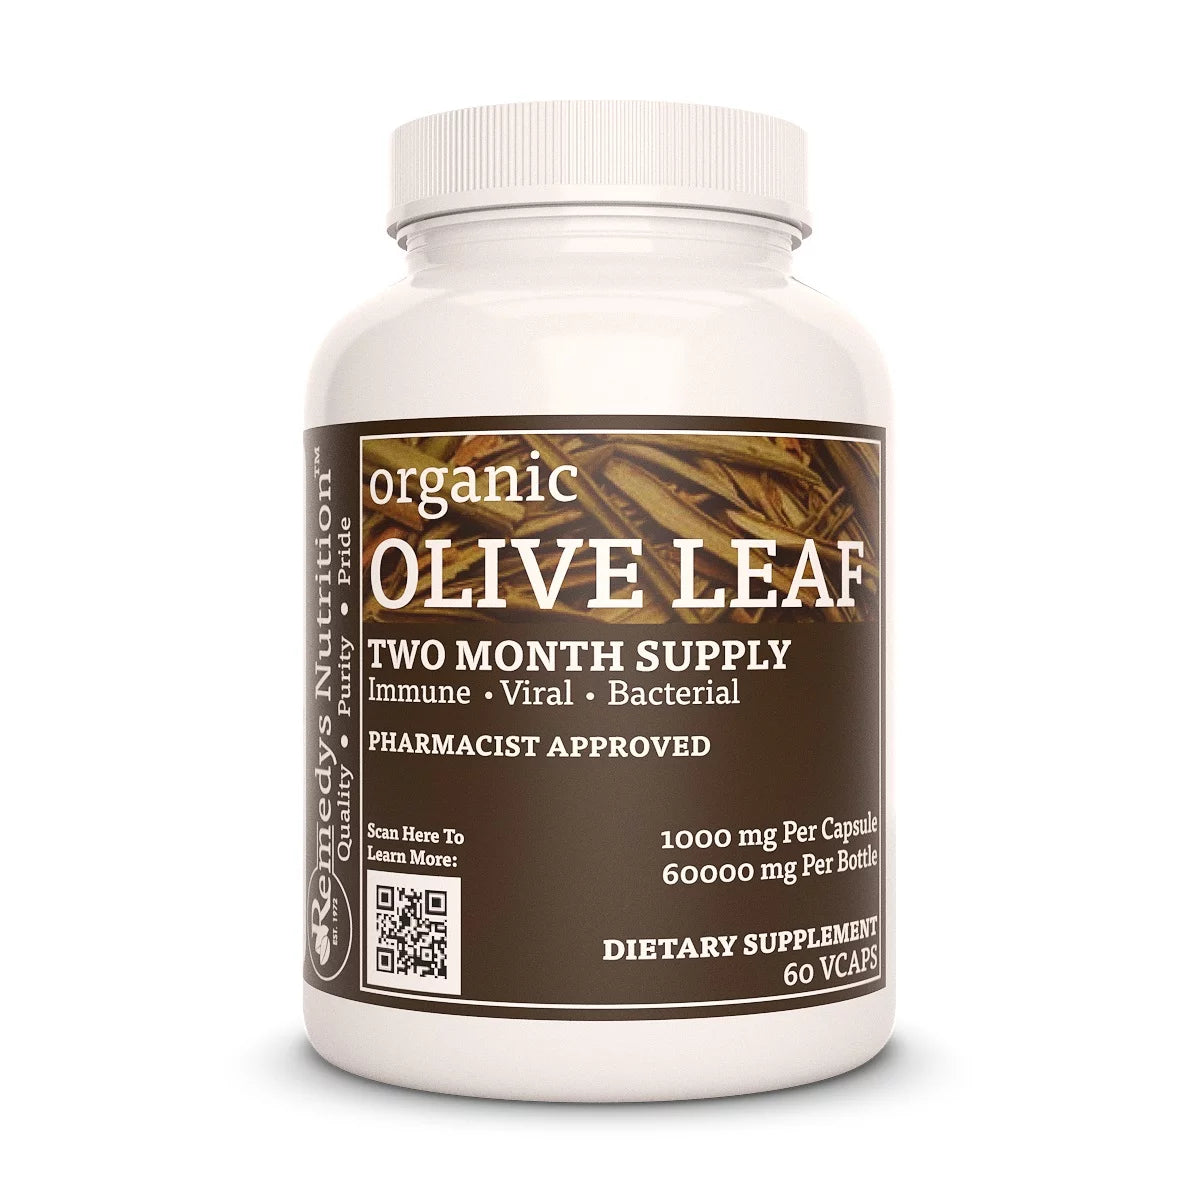 Image of Remedy's Nutrition® Olive Leaf Capsules Herbal Dietary Supplement front bottle. Made in the USA. Olea europaea.